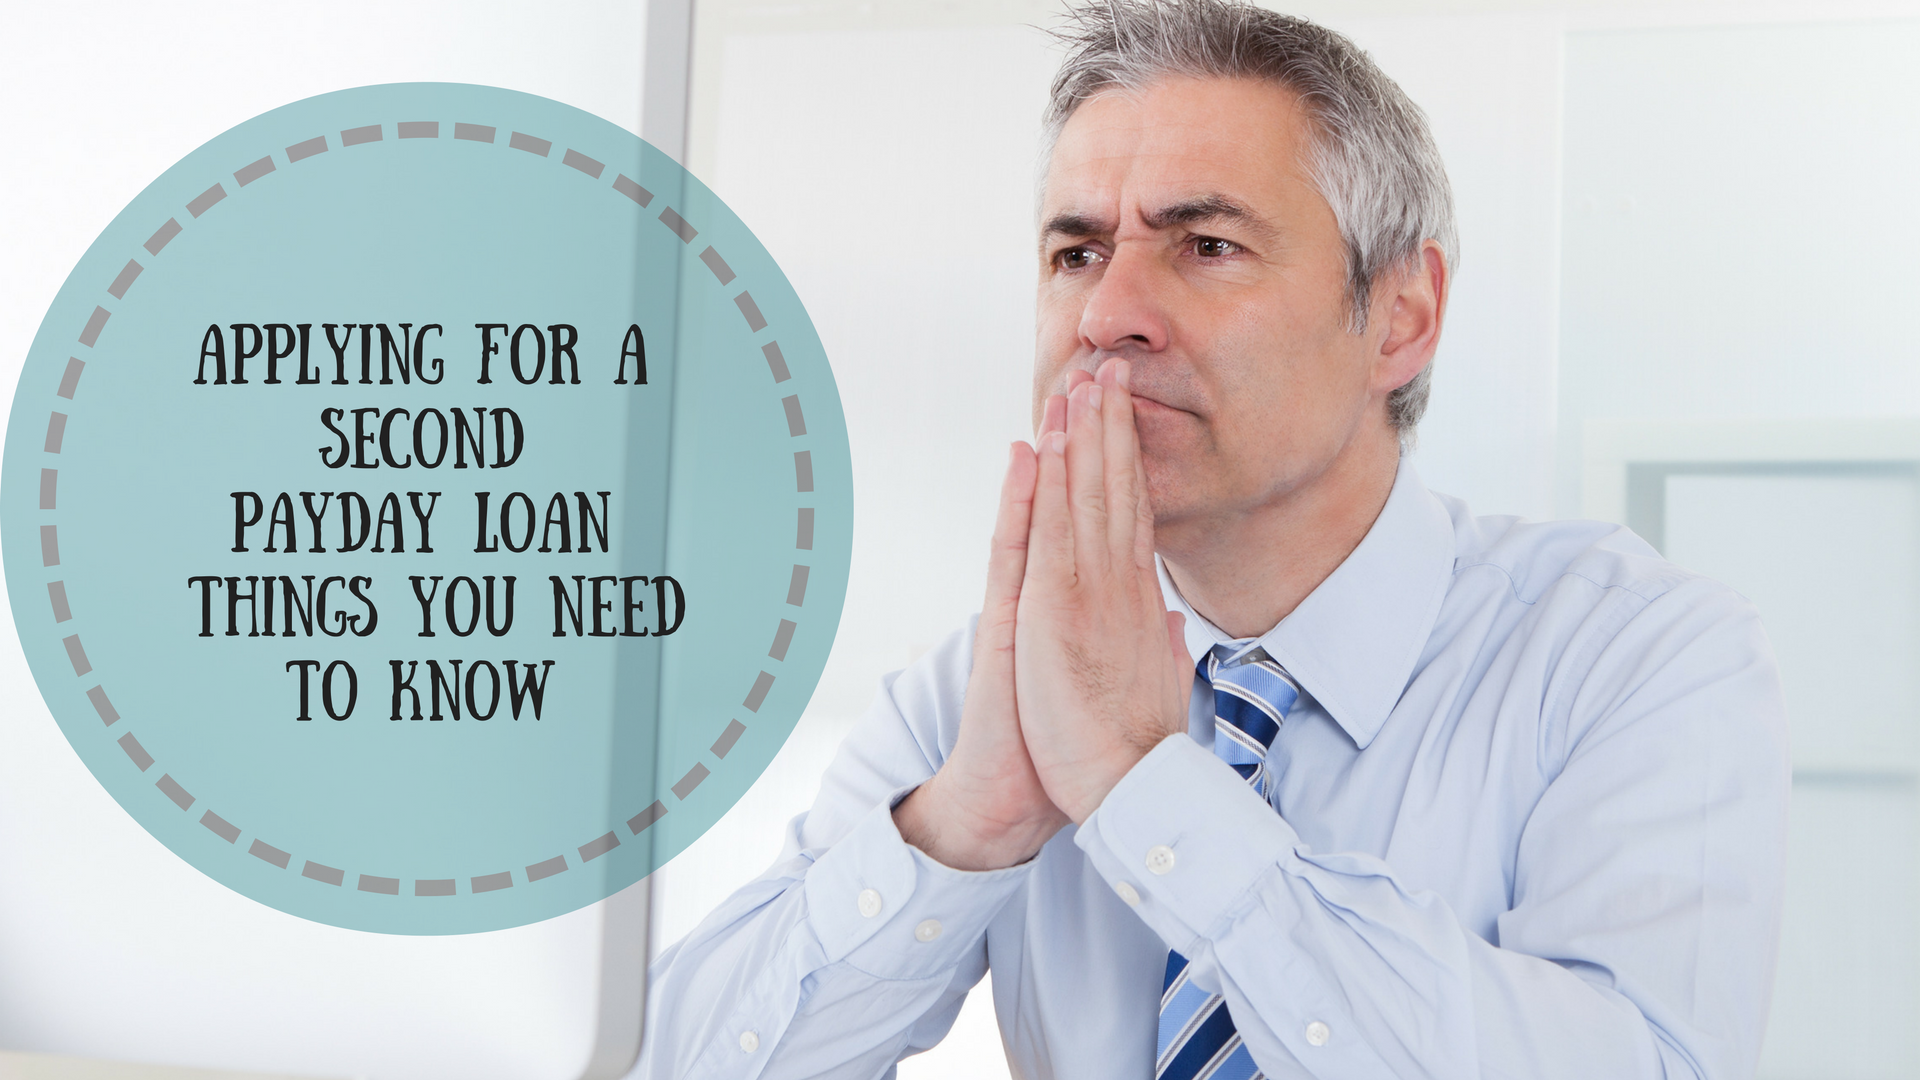 Applying for a Second Payday Loan: Things You Need to Know